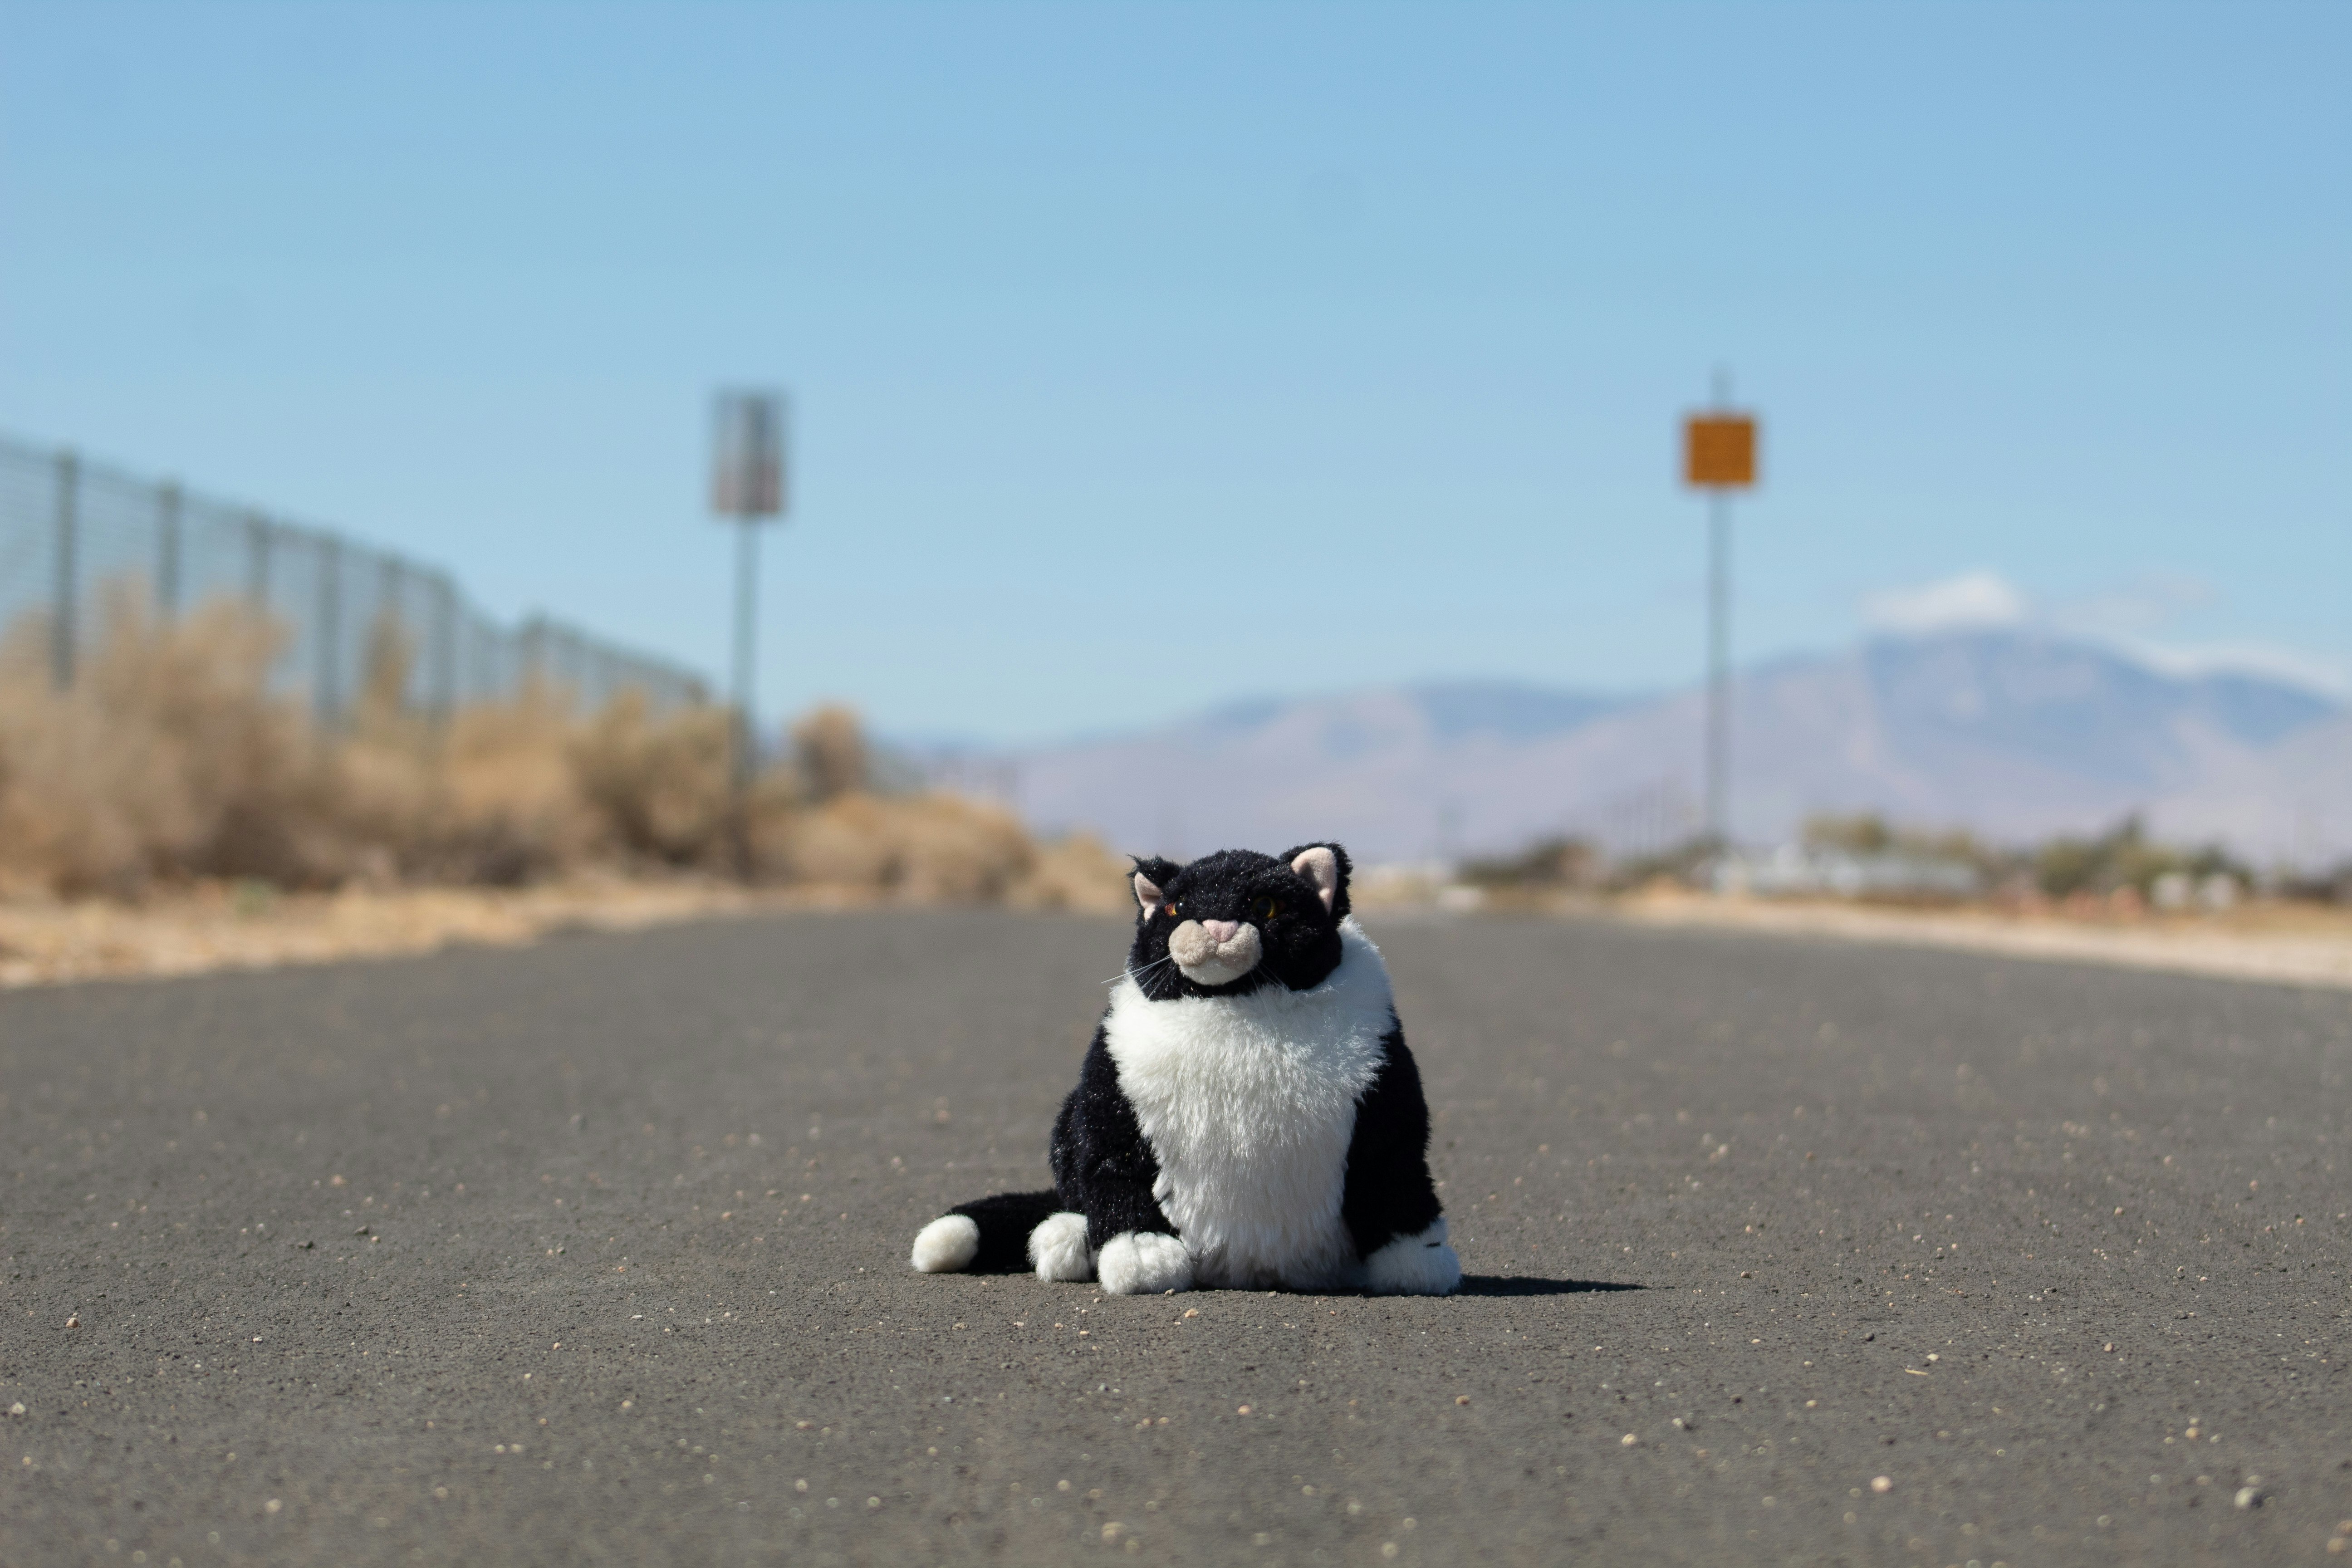 tuxedo cat sitting on the road during daytime